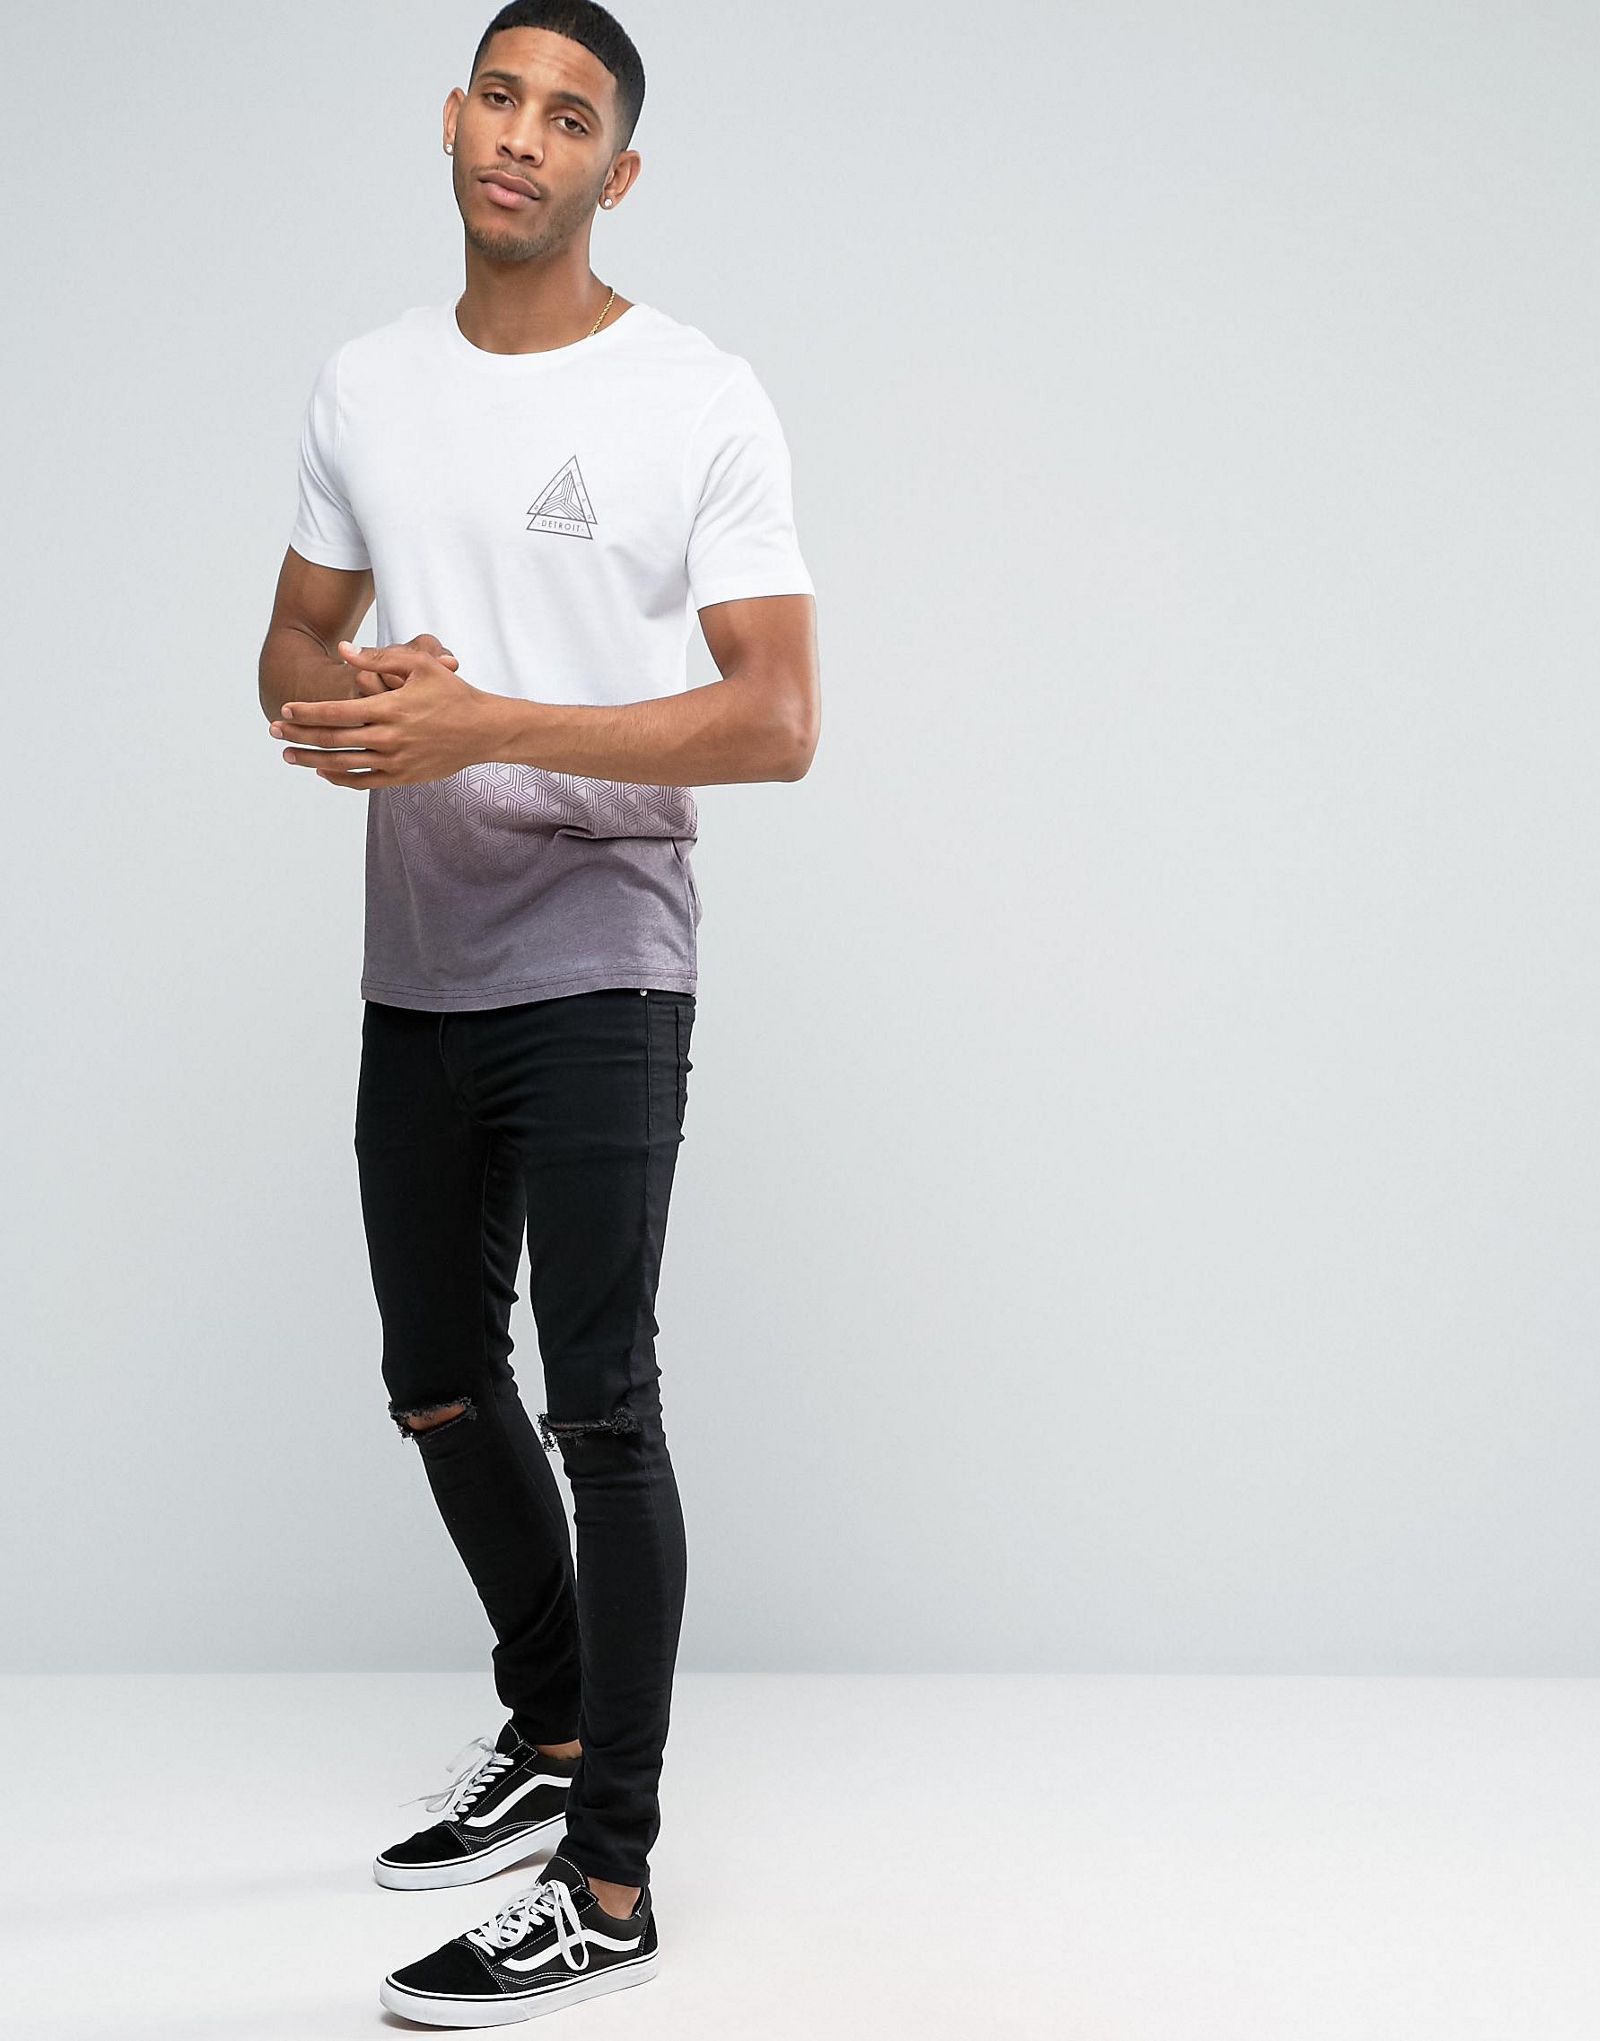 River Island T-Shirt With Fade Print In Berry